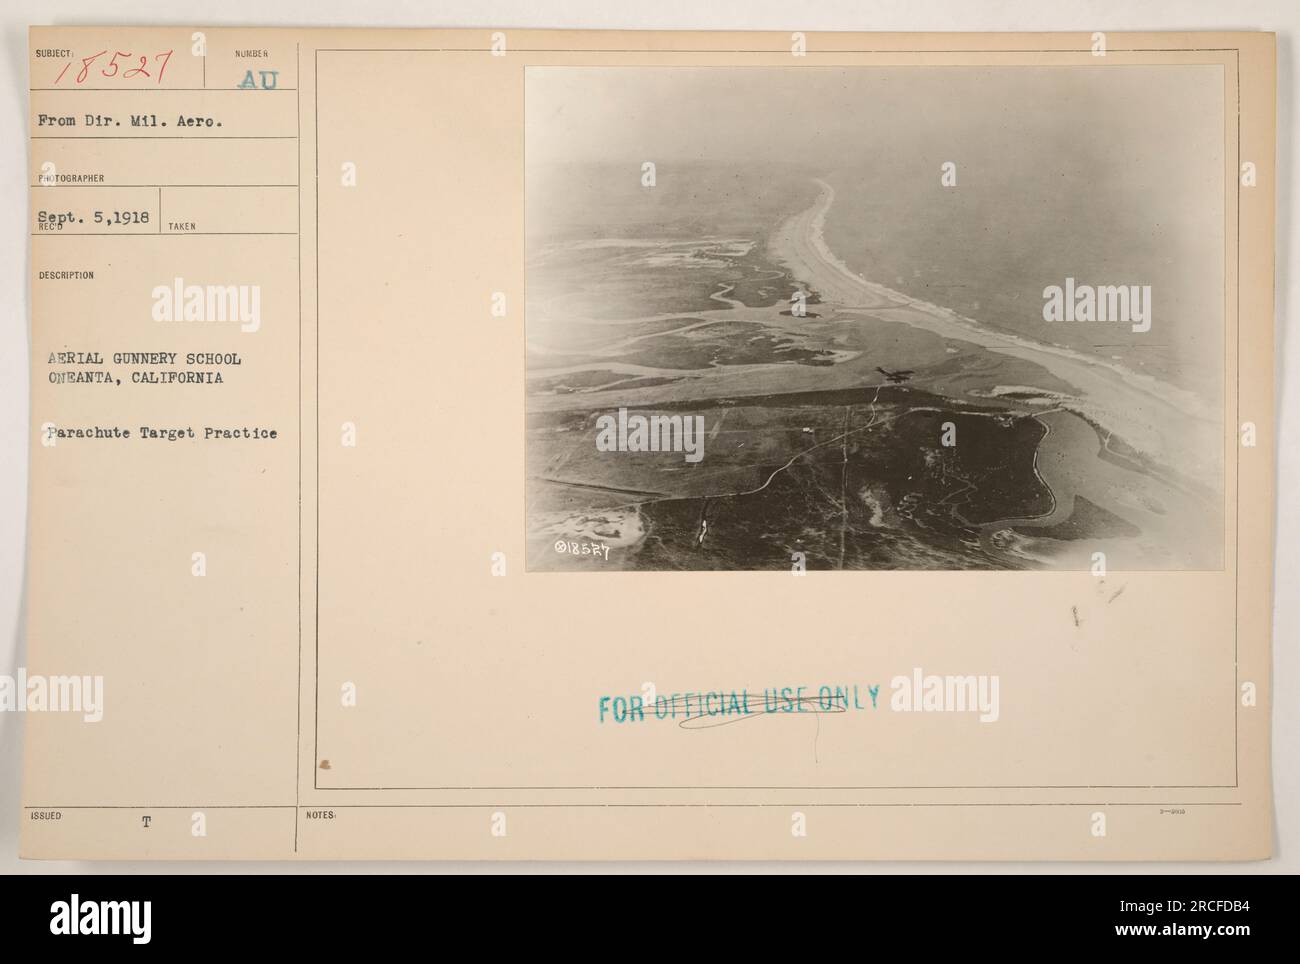 Image showcases an aerial gunnery school in Oneanta, California during World War I. The photograph depicts parachute target practice, which was a crucial aspect of training for military personnel. The image is dated September 5, 1918, and is classified for official use only. Stock Photo